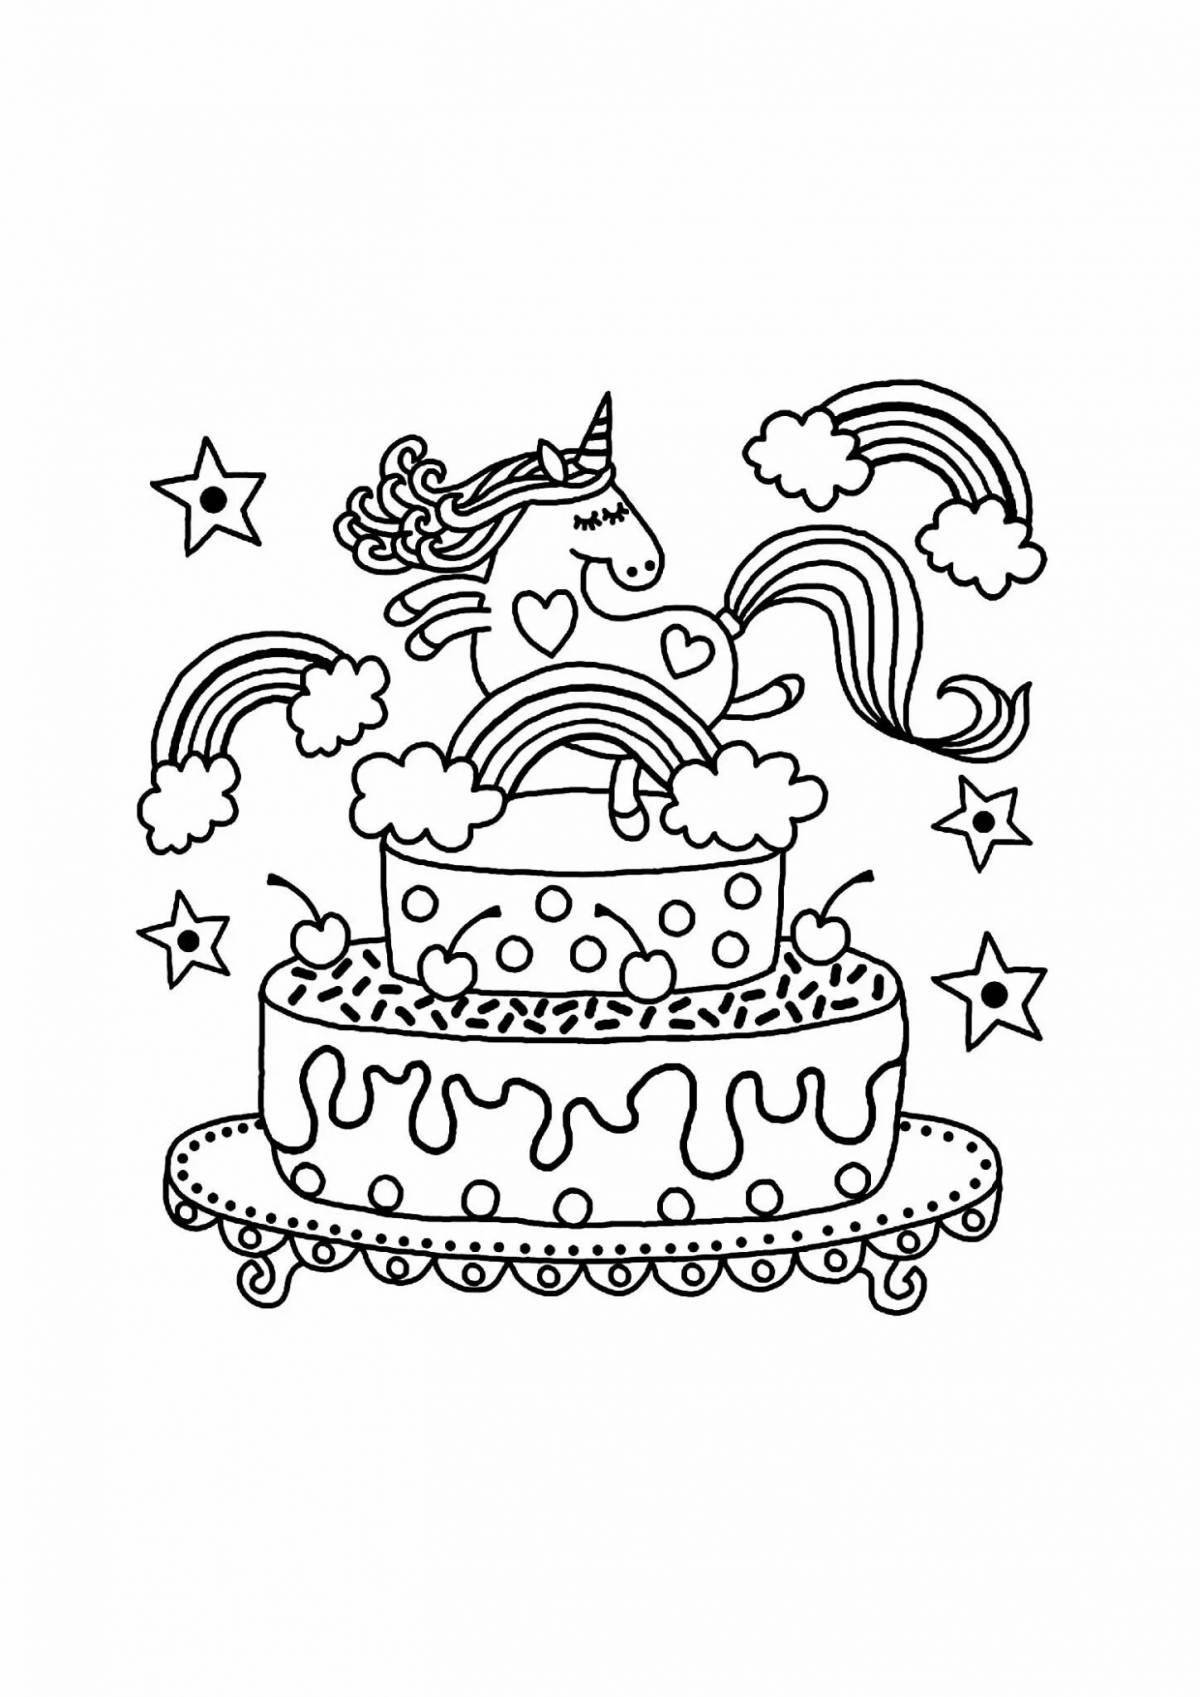 Coloring page joyful cakes for children 5-6 years old